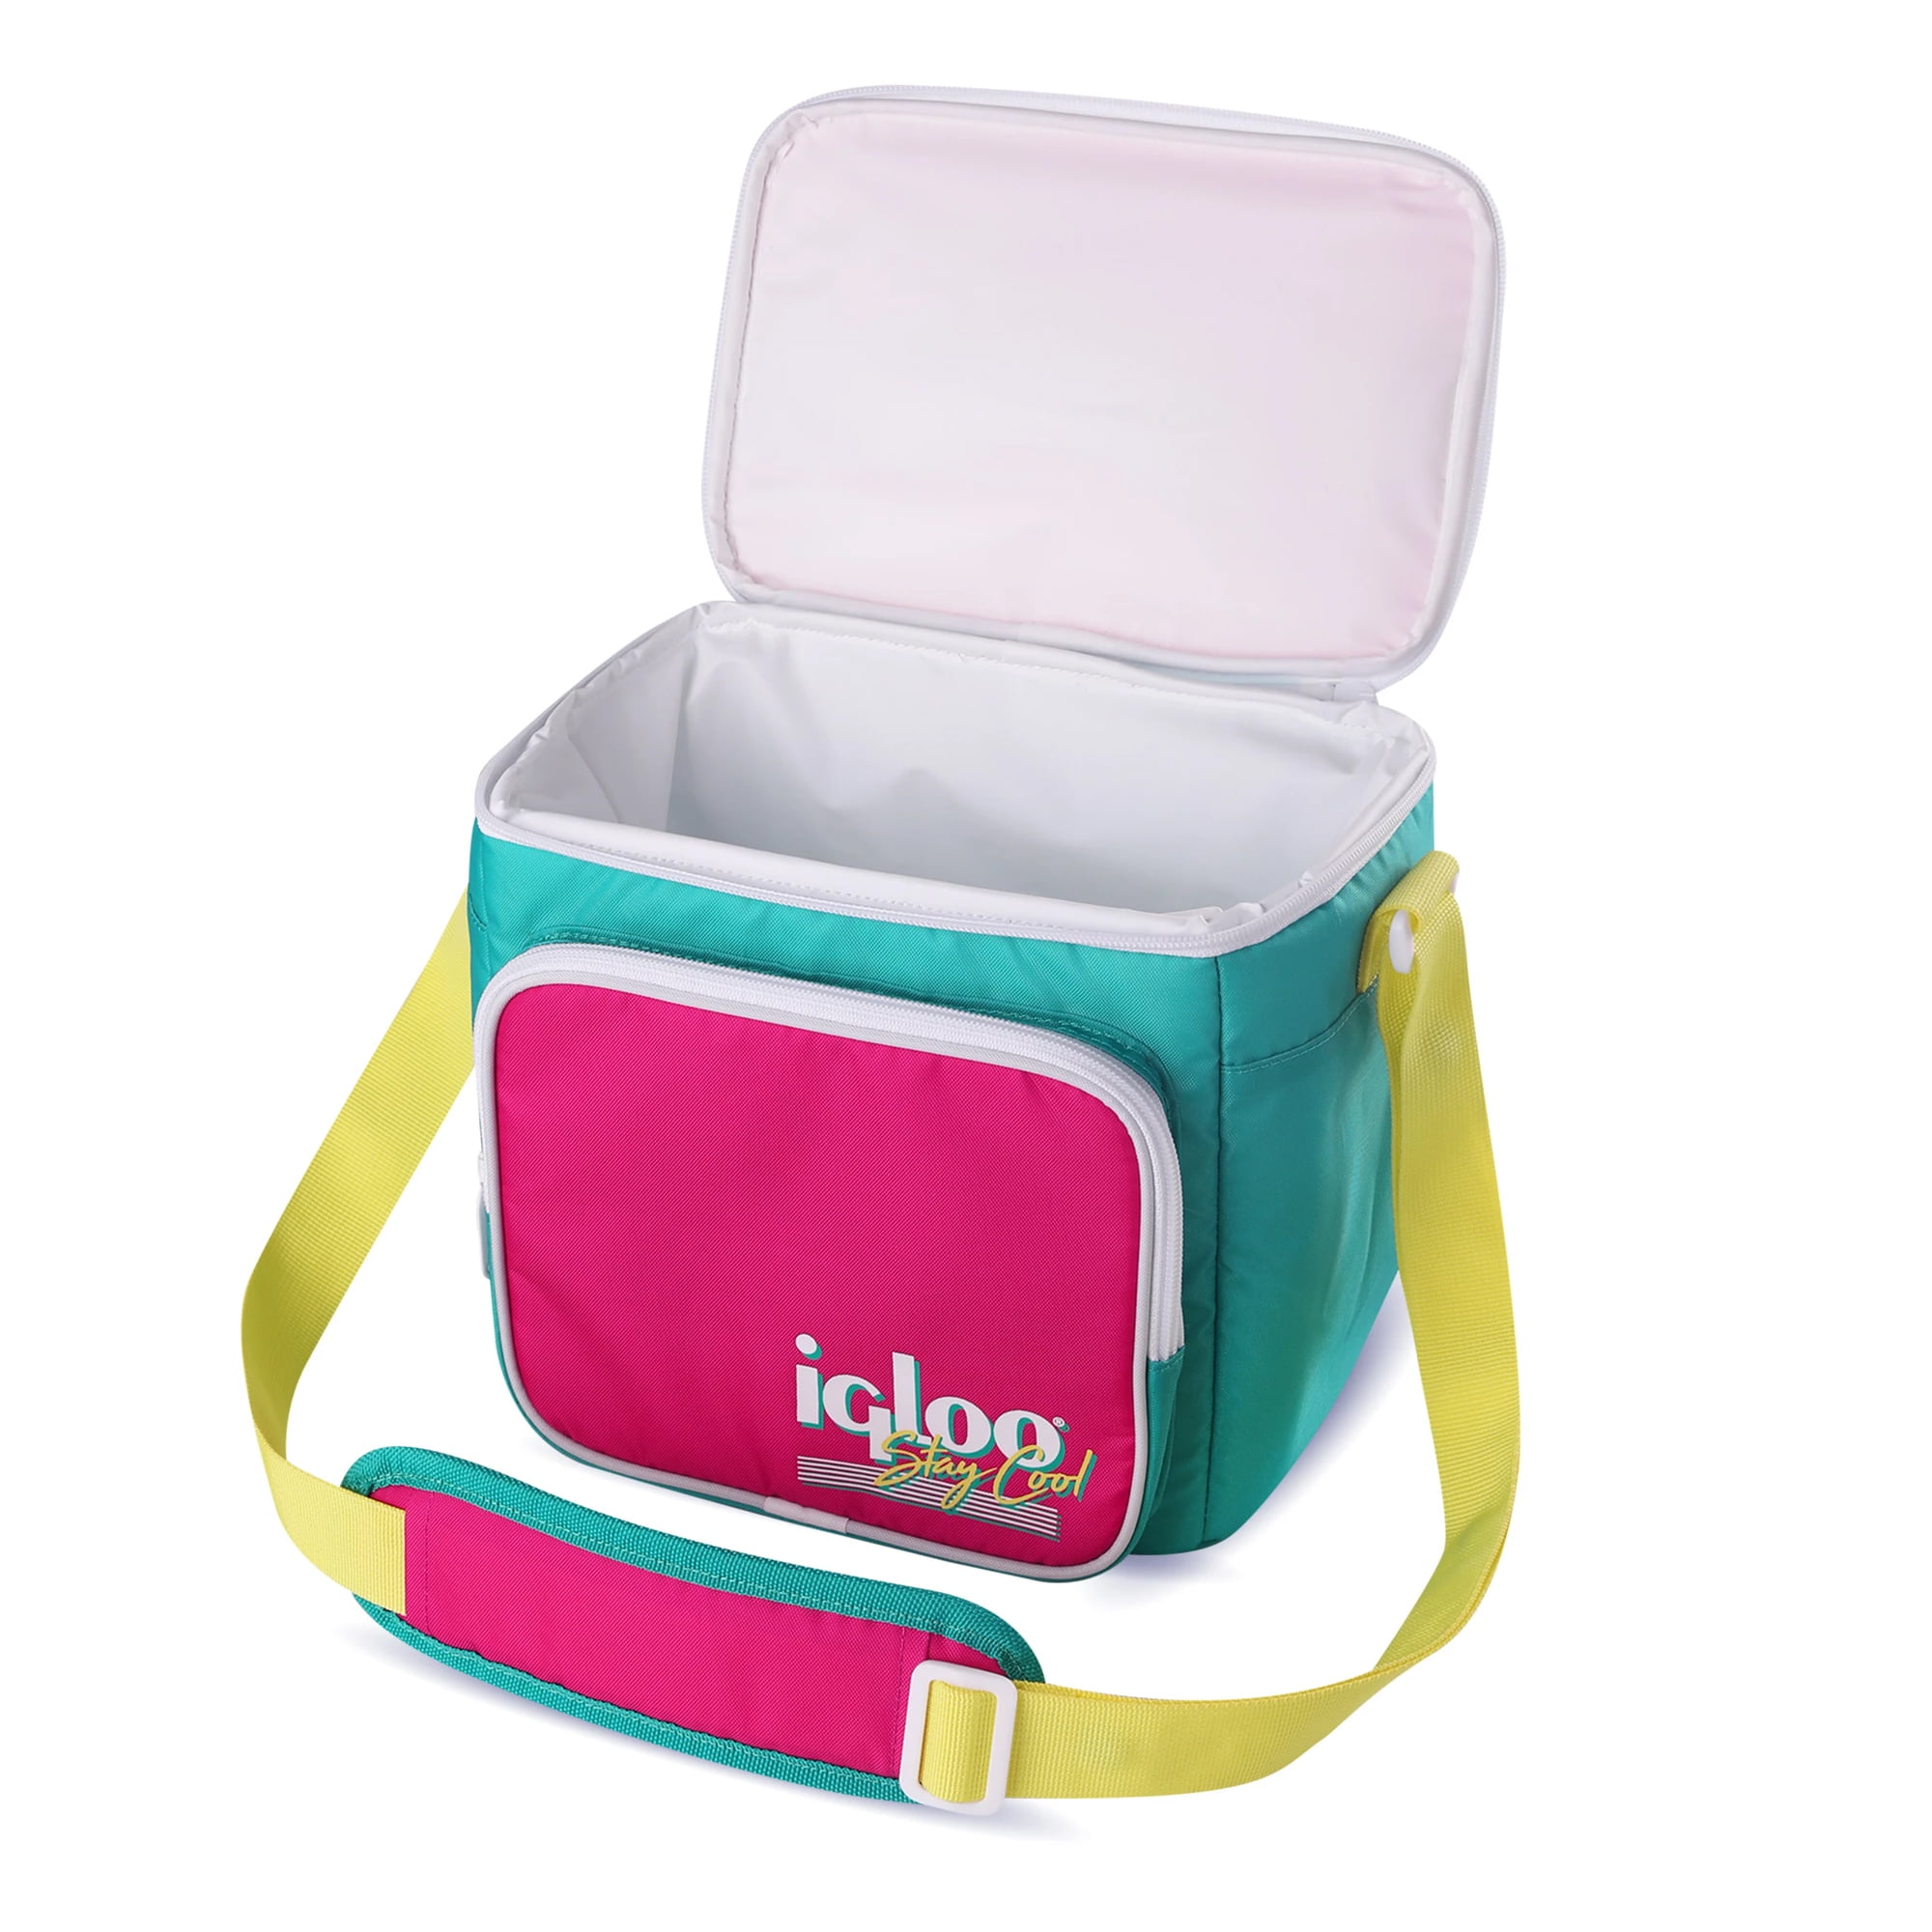 Igloo 90s Retro Collection Square Neon Lunch Box Soft Side Cooler Bag with  Strap 